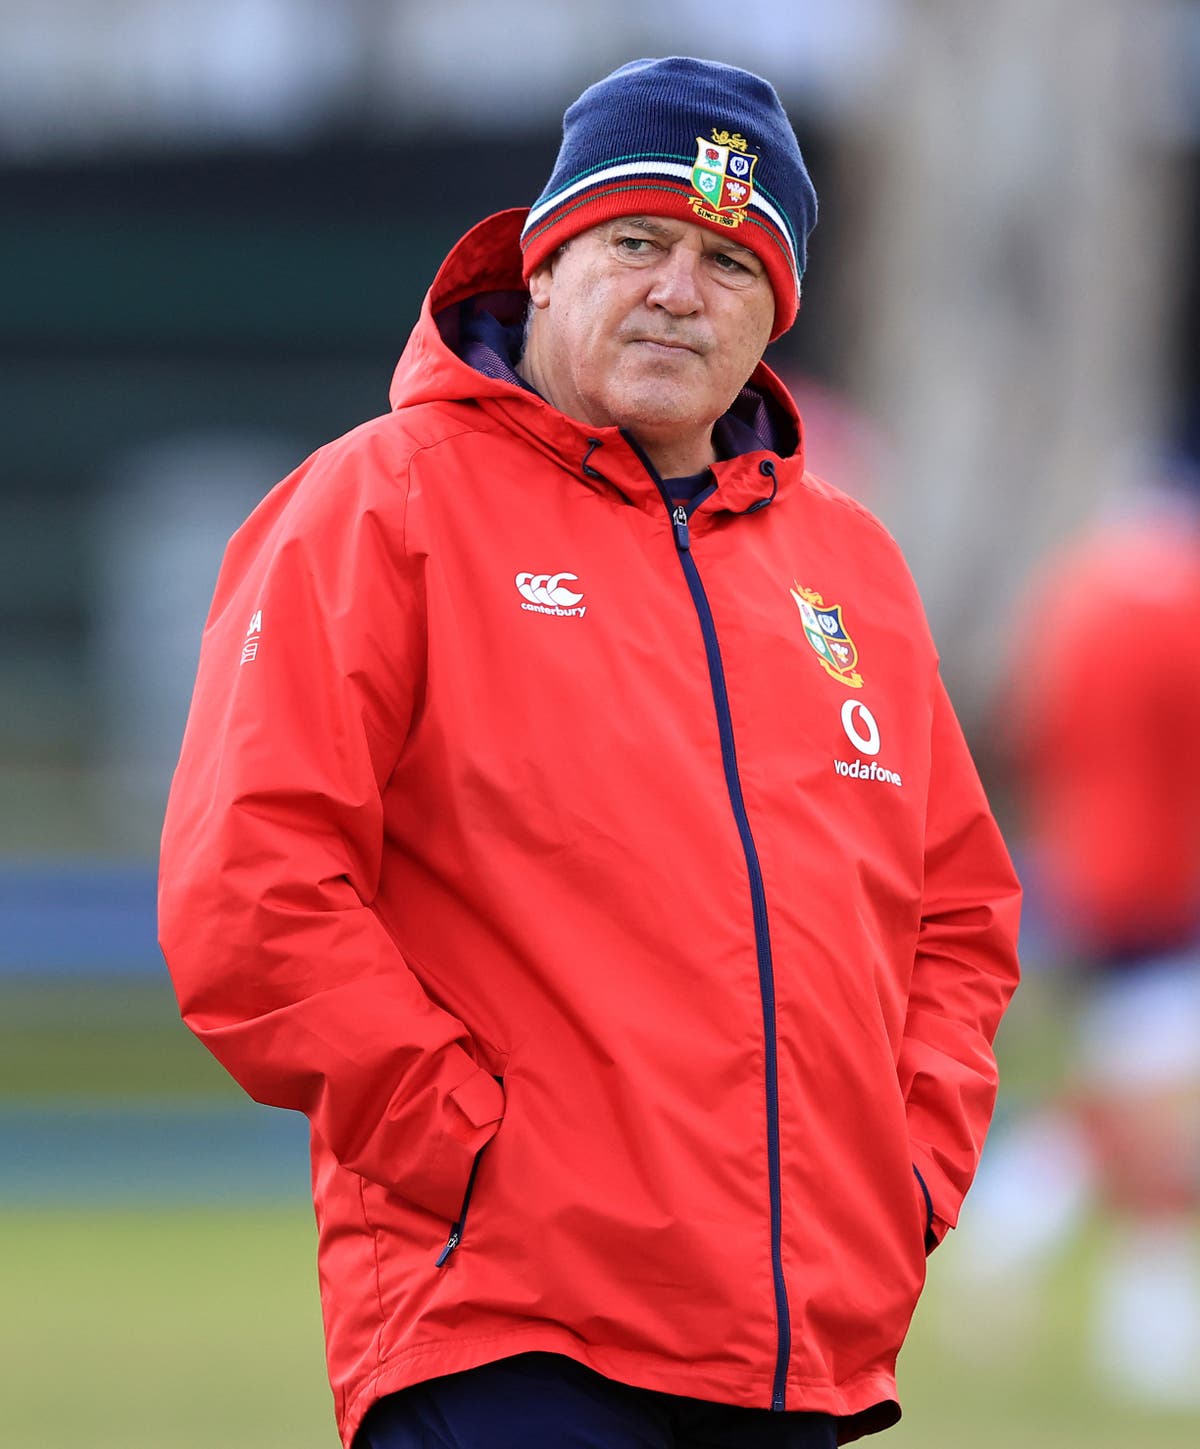 Warren Gatland preparing for ‘cup final’ as Lions series goes to decider